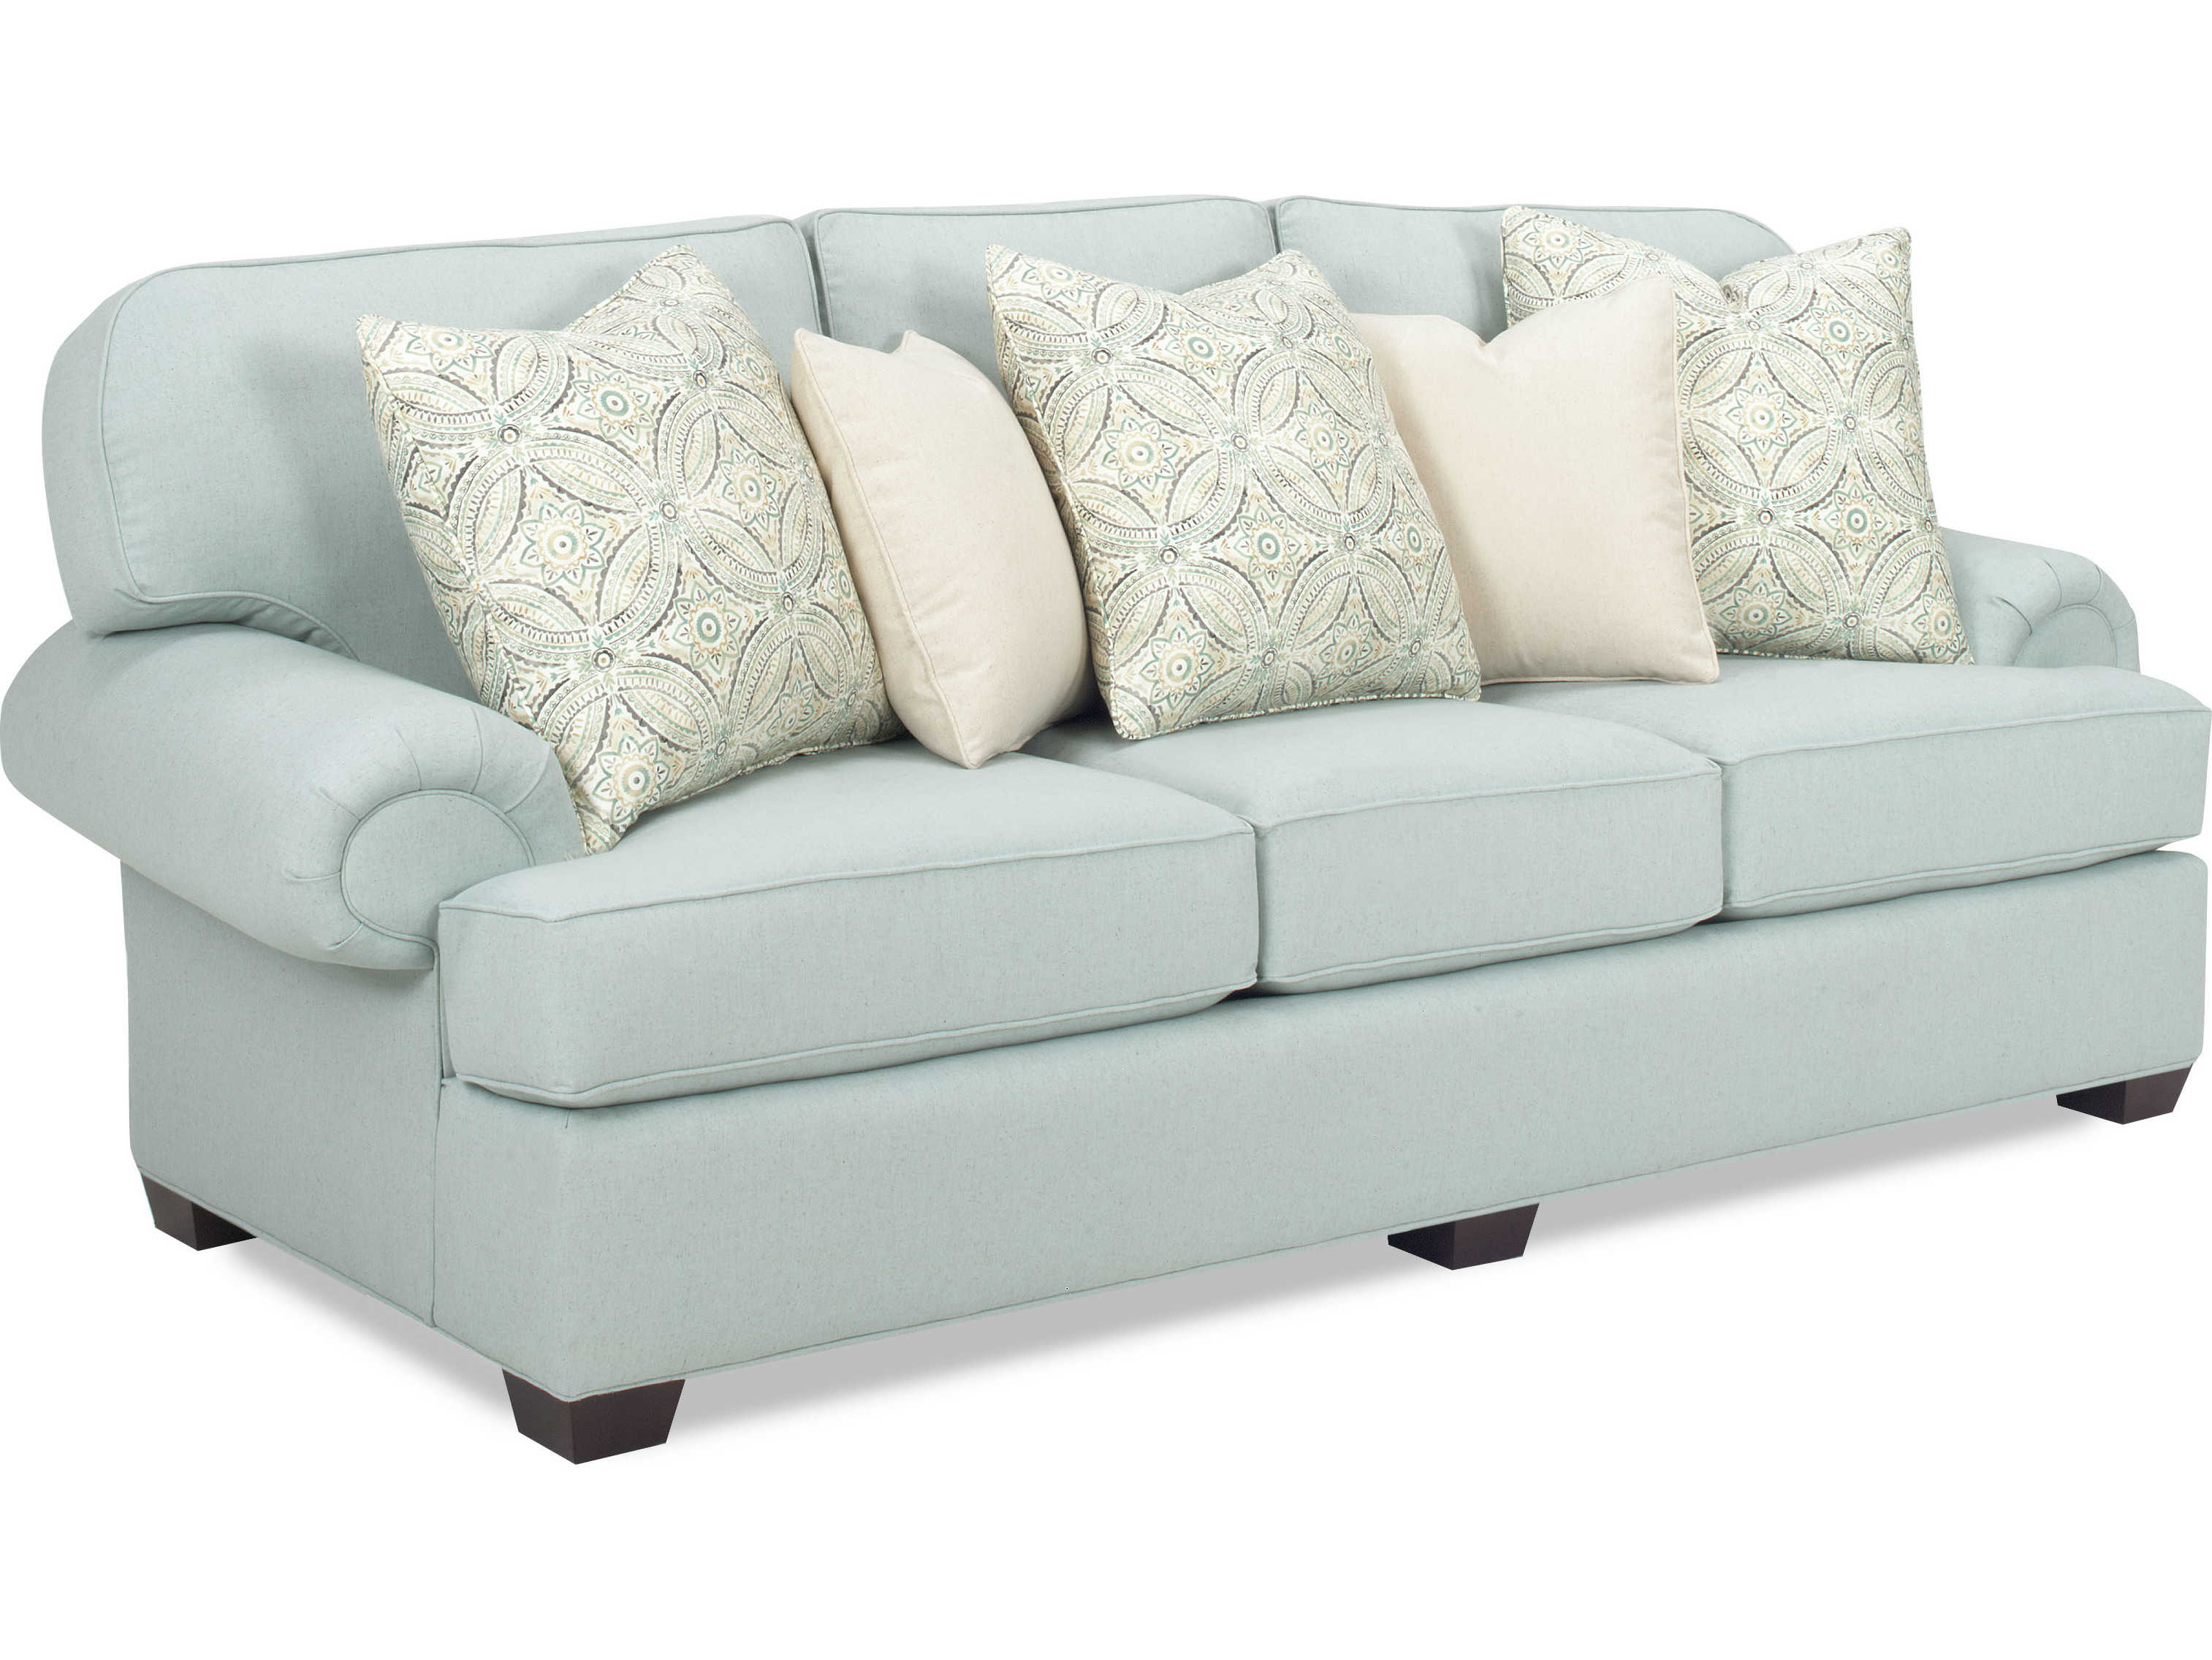 Sink into Serenity: Top 10 Comfy Couches to Upgrade Your Living Room ...